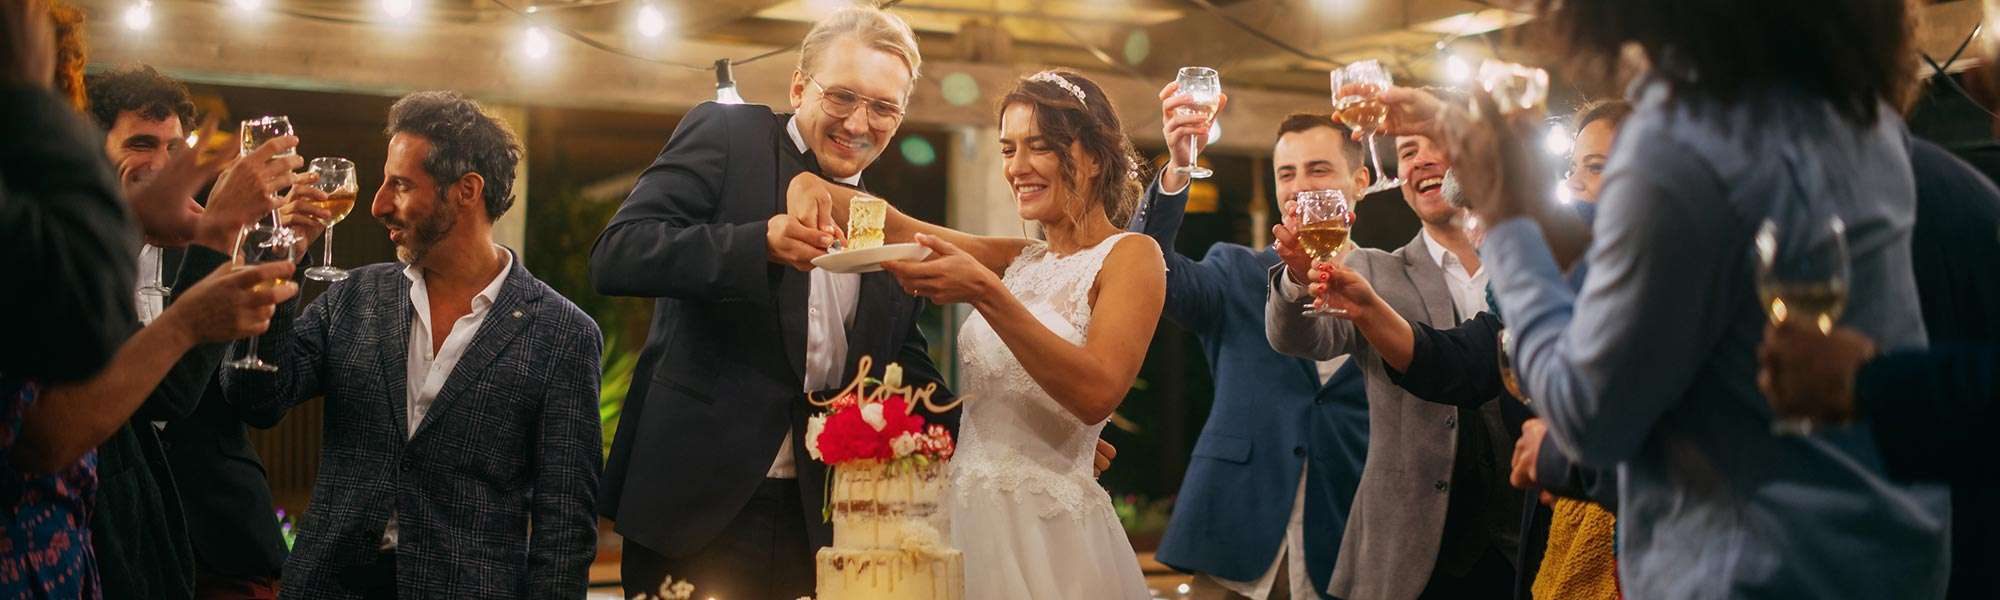 Couple cutting the cake at their reception